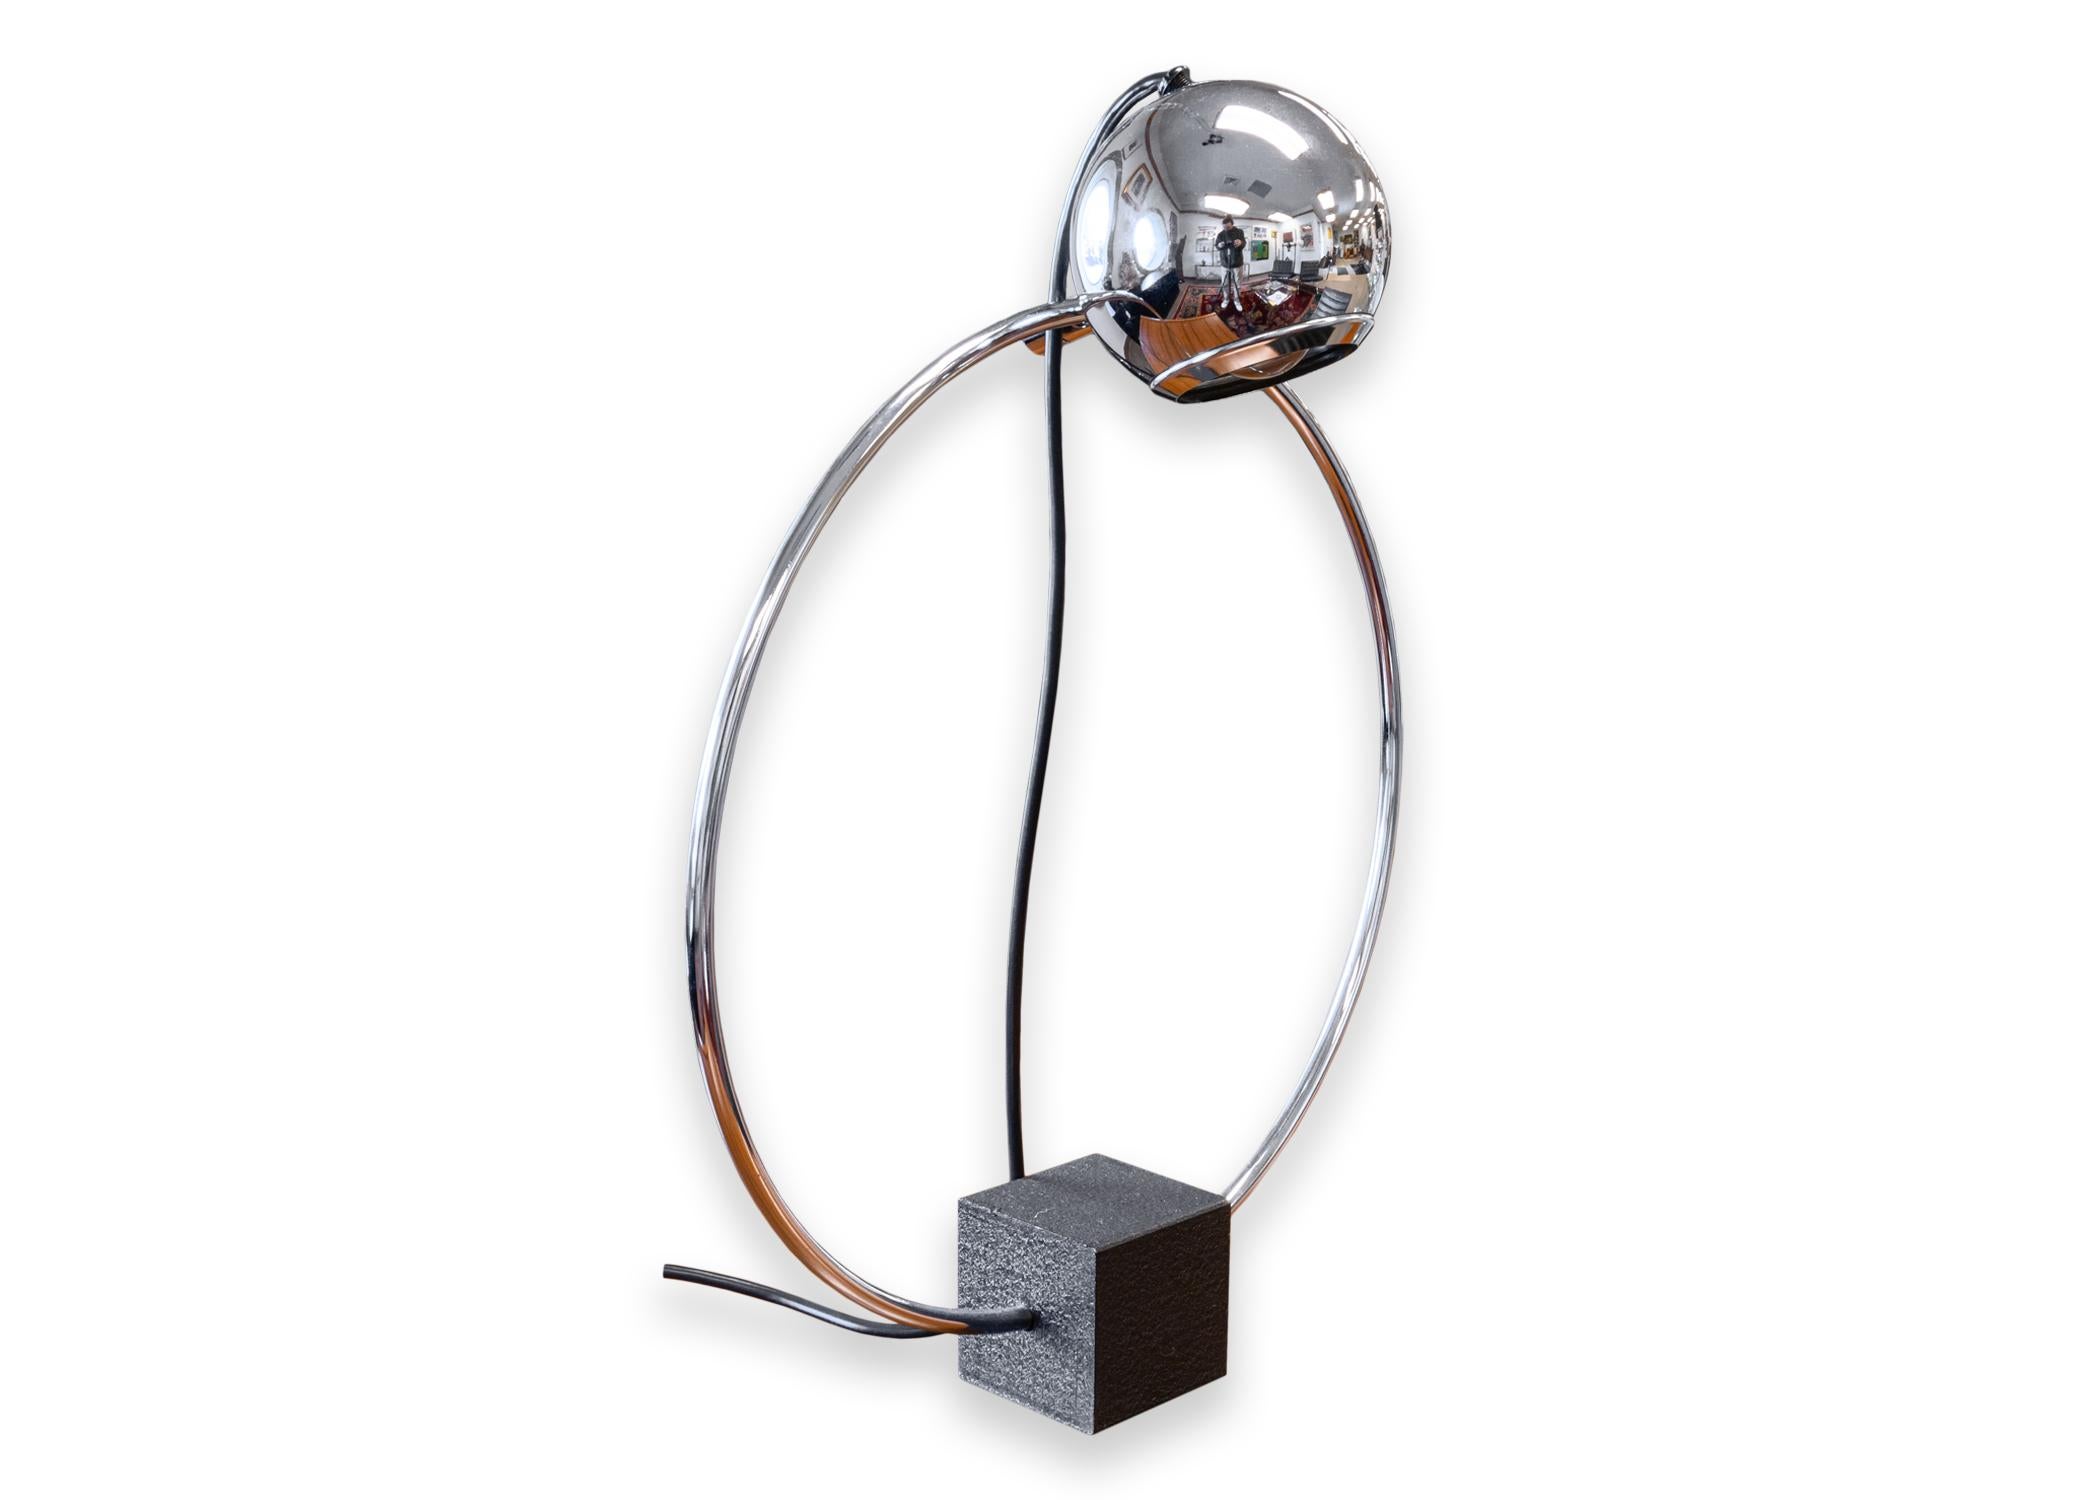 An eyeball atomic orbiter table lamp circa 1970. This is a lovely mid century modern table lamp featuring a chrome plated design, and a black square base. This lamp is very adjustable. The lamp head tilts, turns, and shifts all around the round